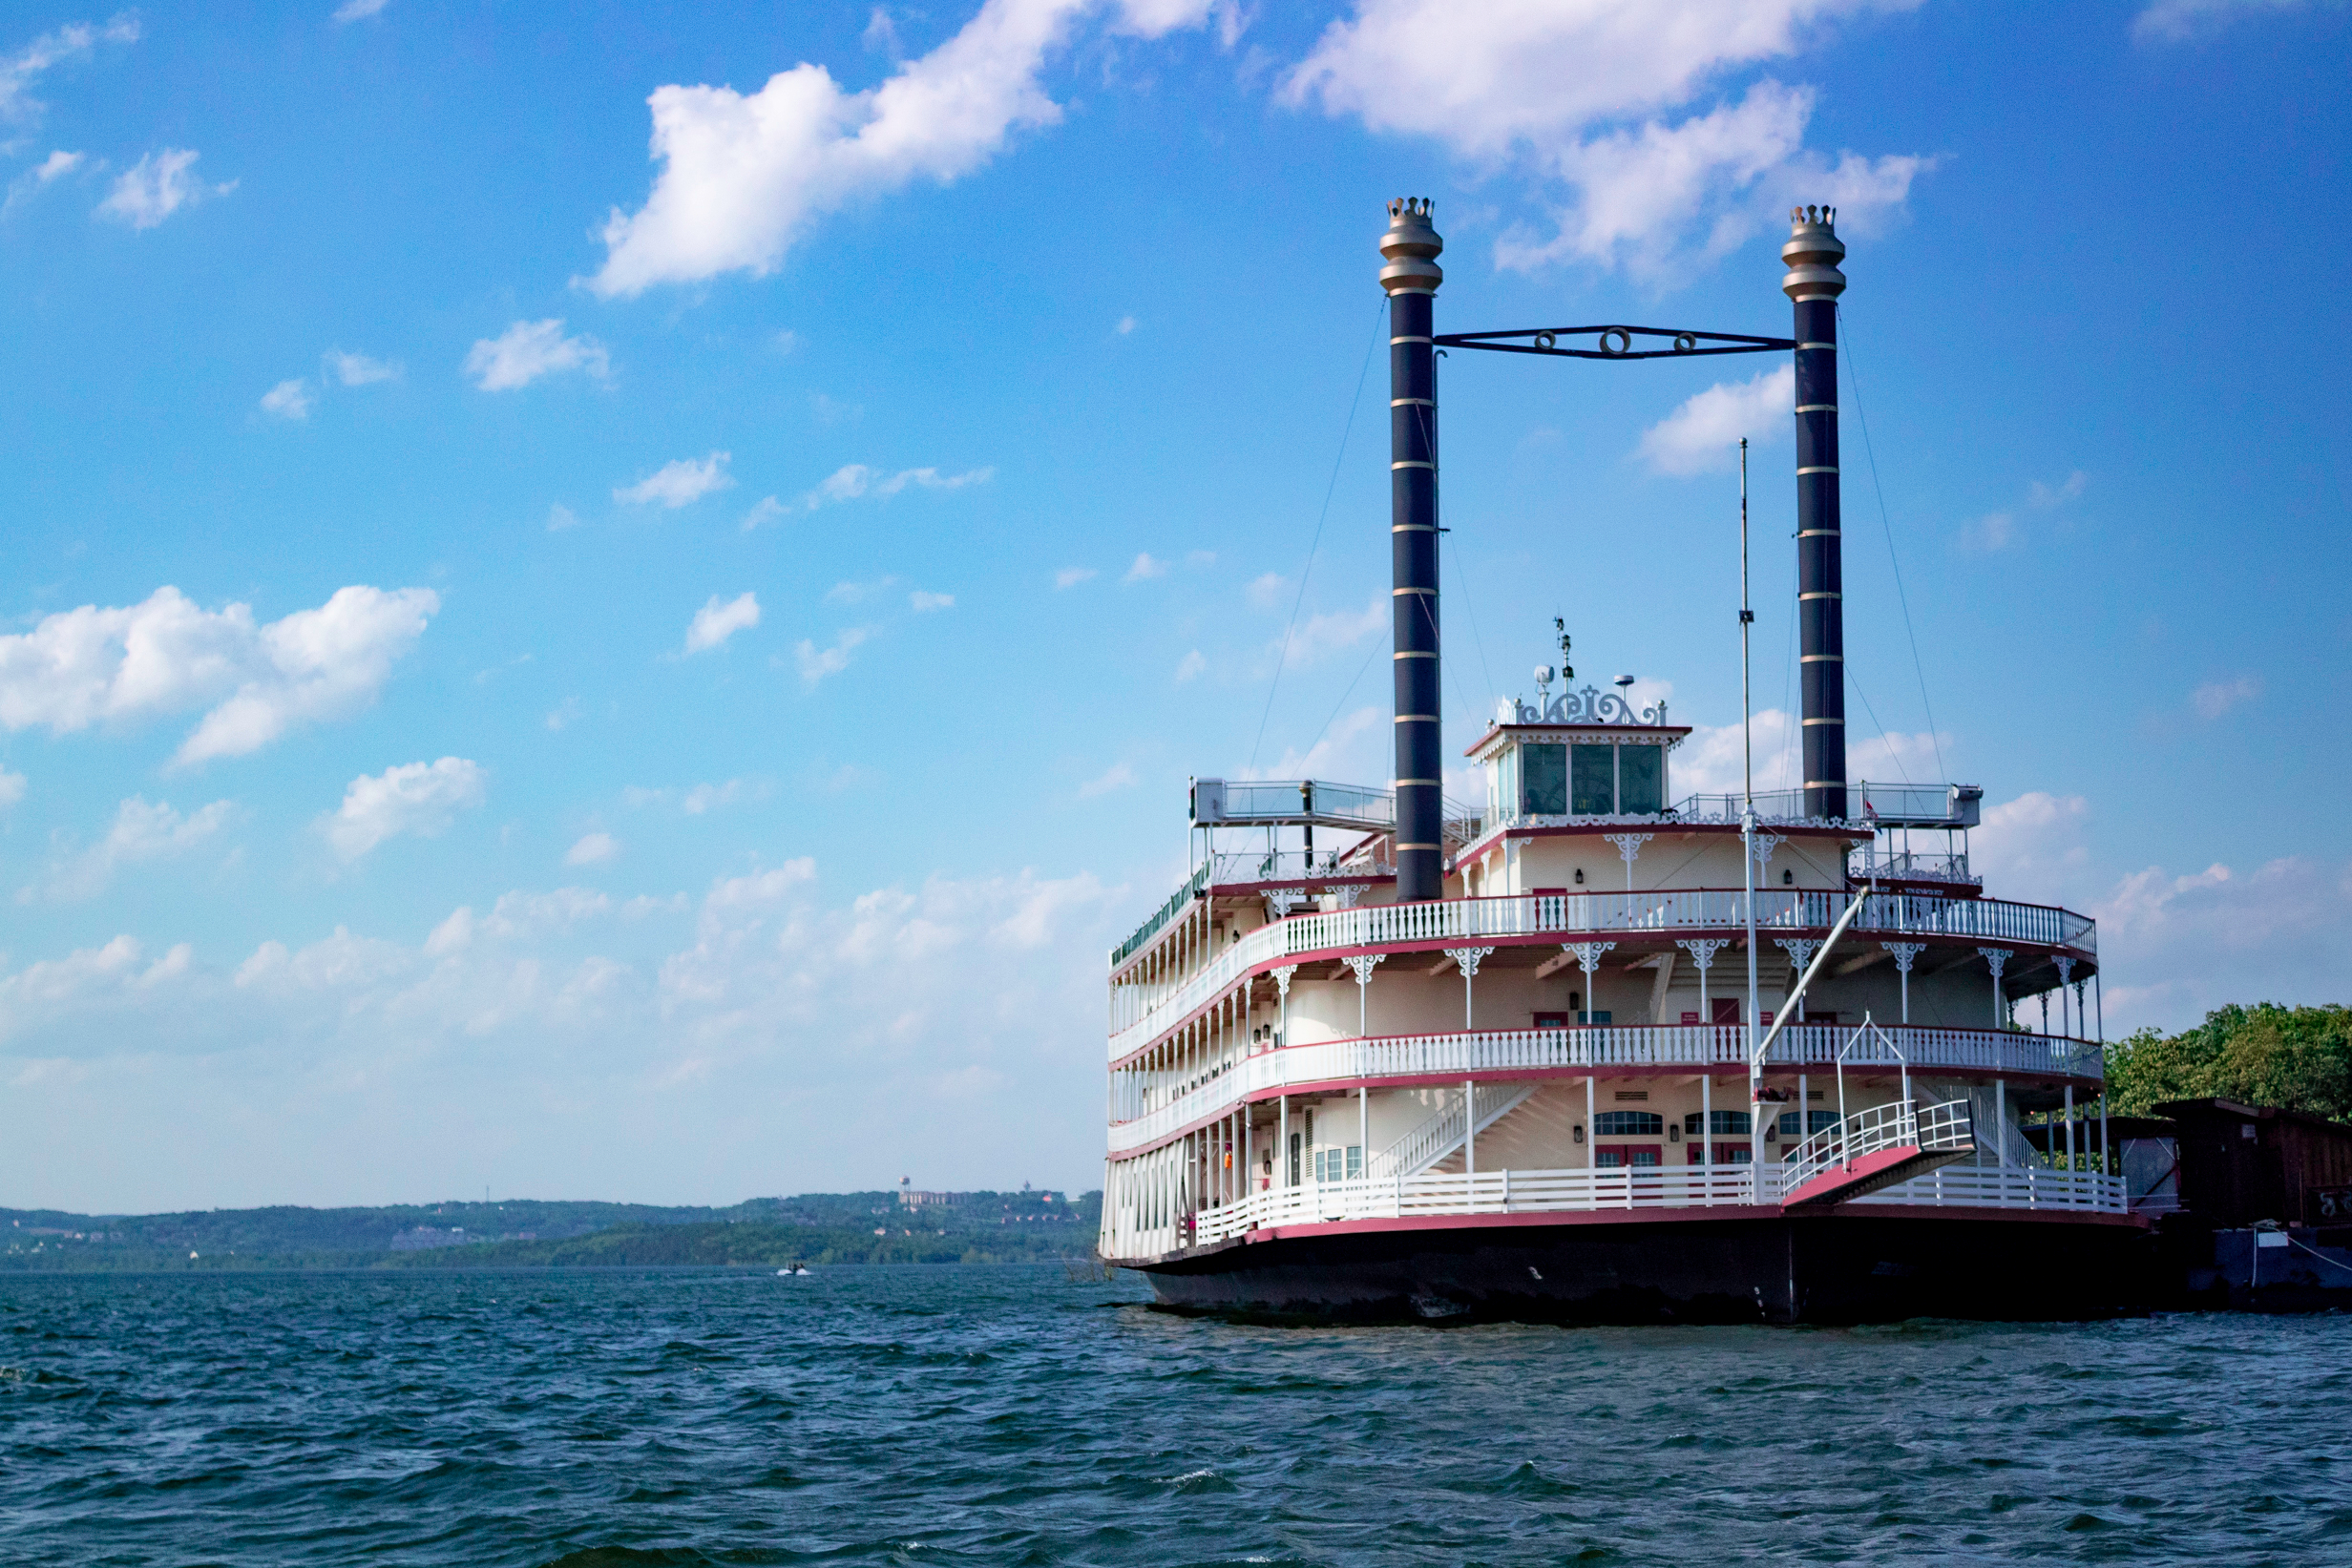 A red and white ferry boat on the blue waters of Table Rock Lake in Branson, Missouri